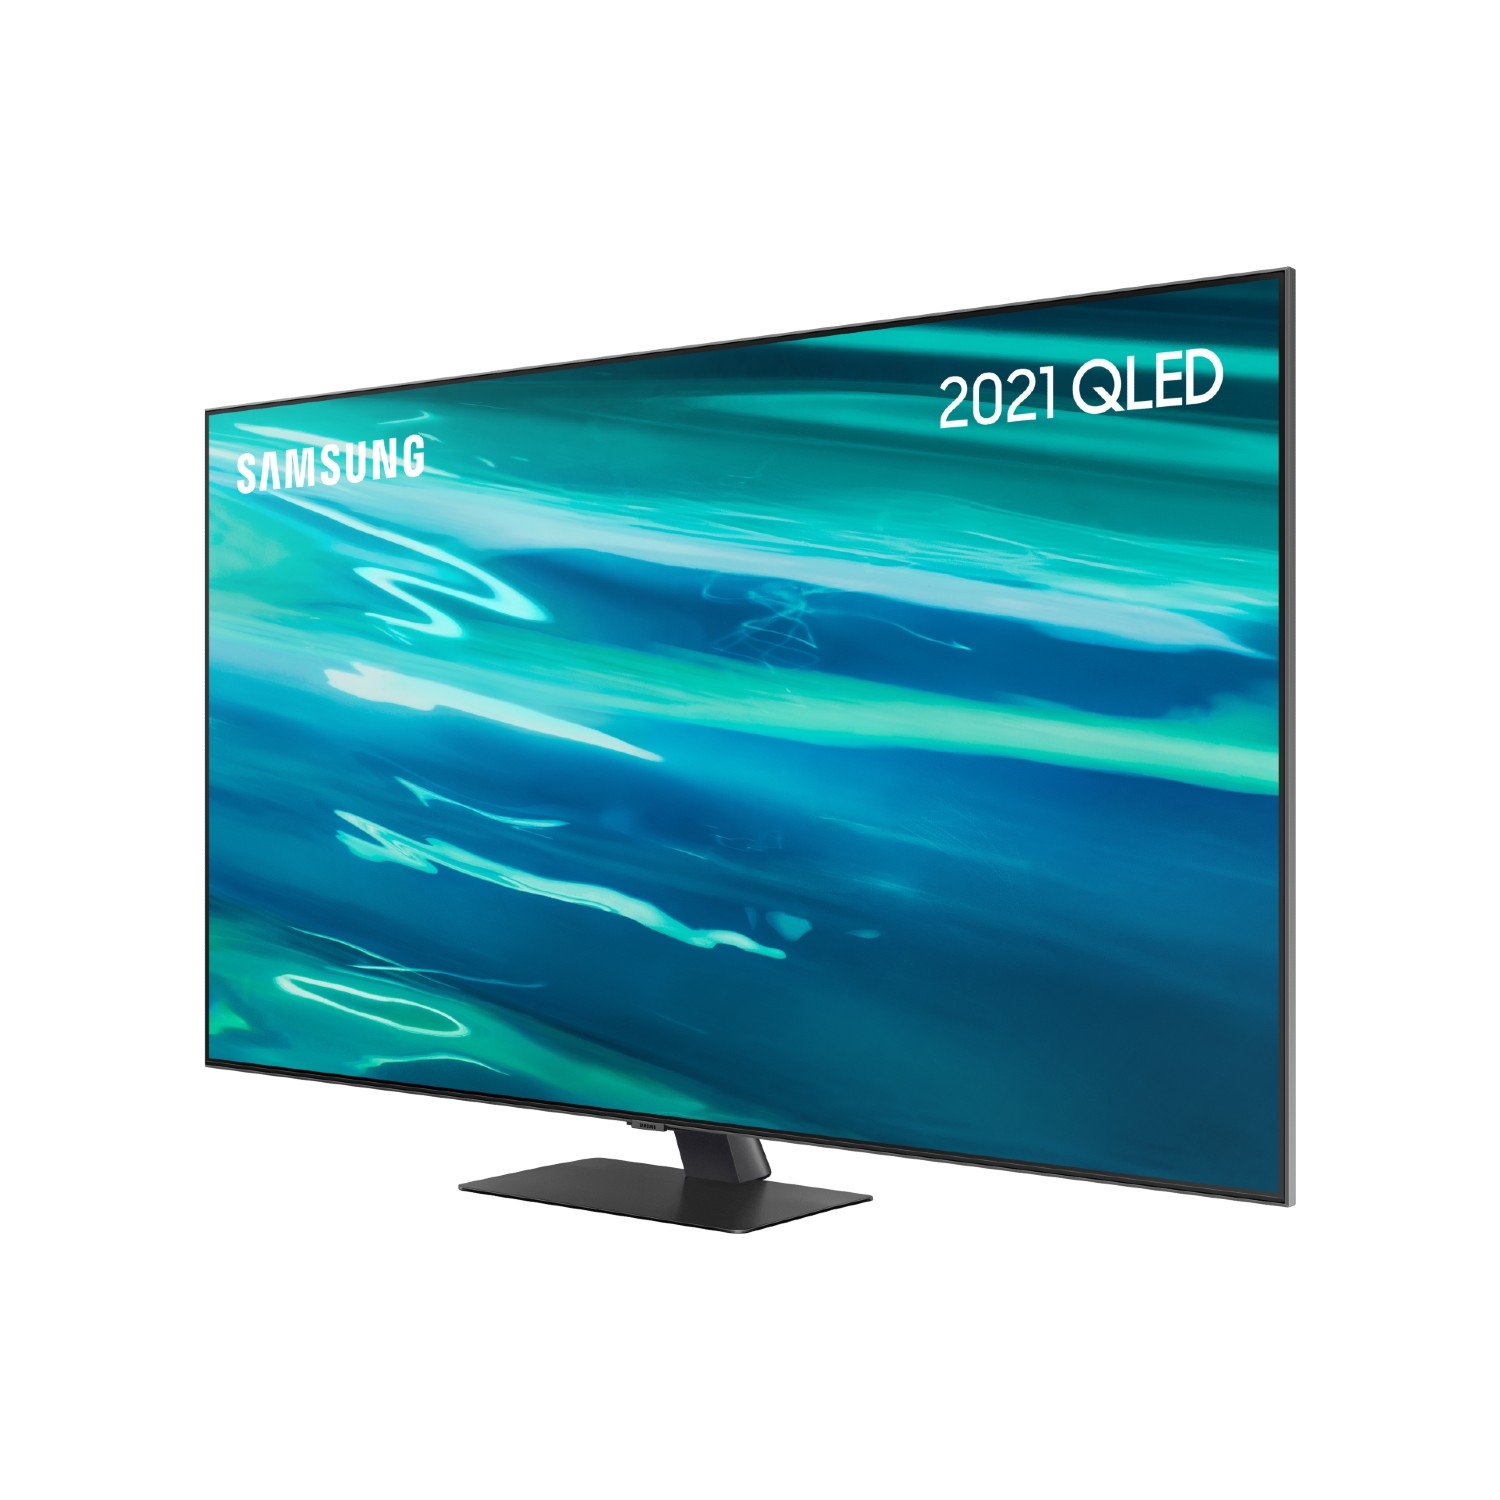 Samsung QE55Q80AATXXU 55" 4K QLED Smart TV Quantum HDR 1500 powered by HDR10+ with object tracking and AI sound - 7